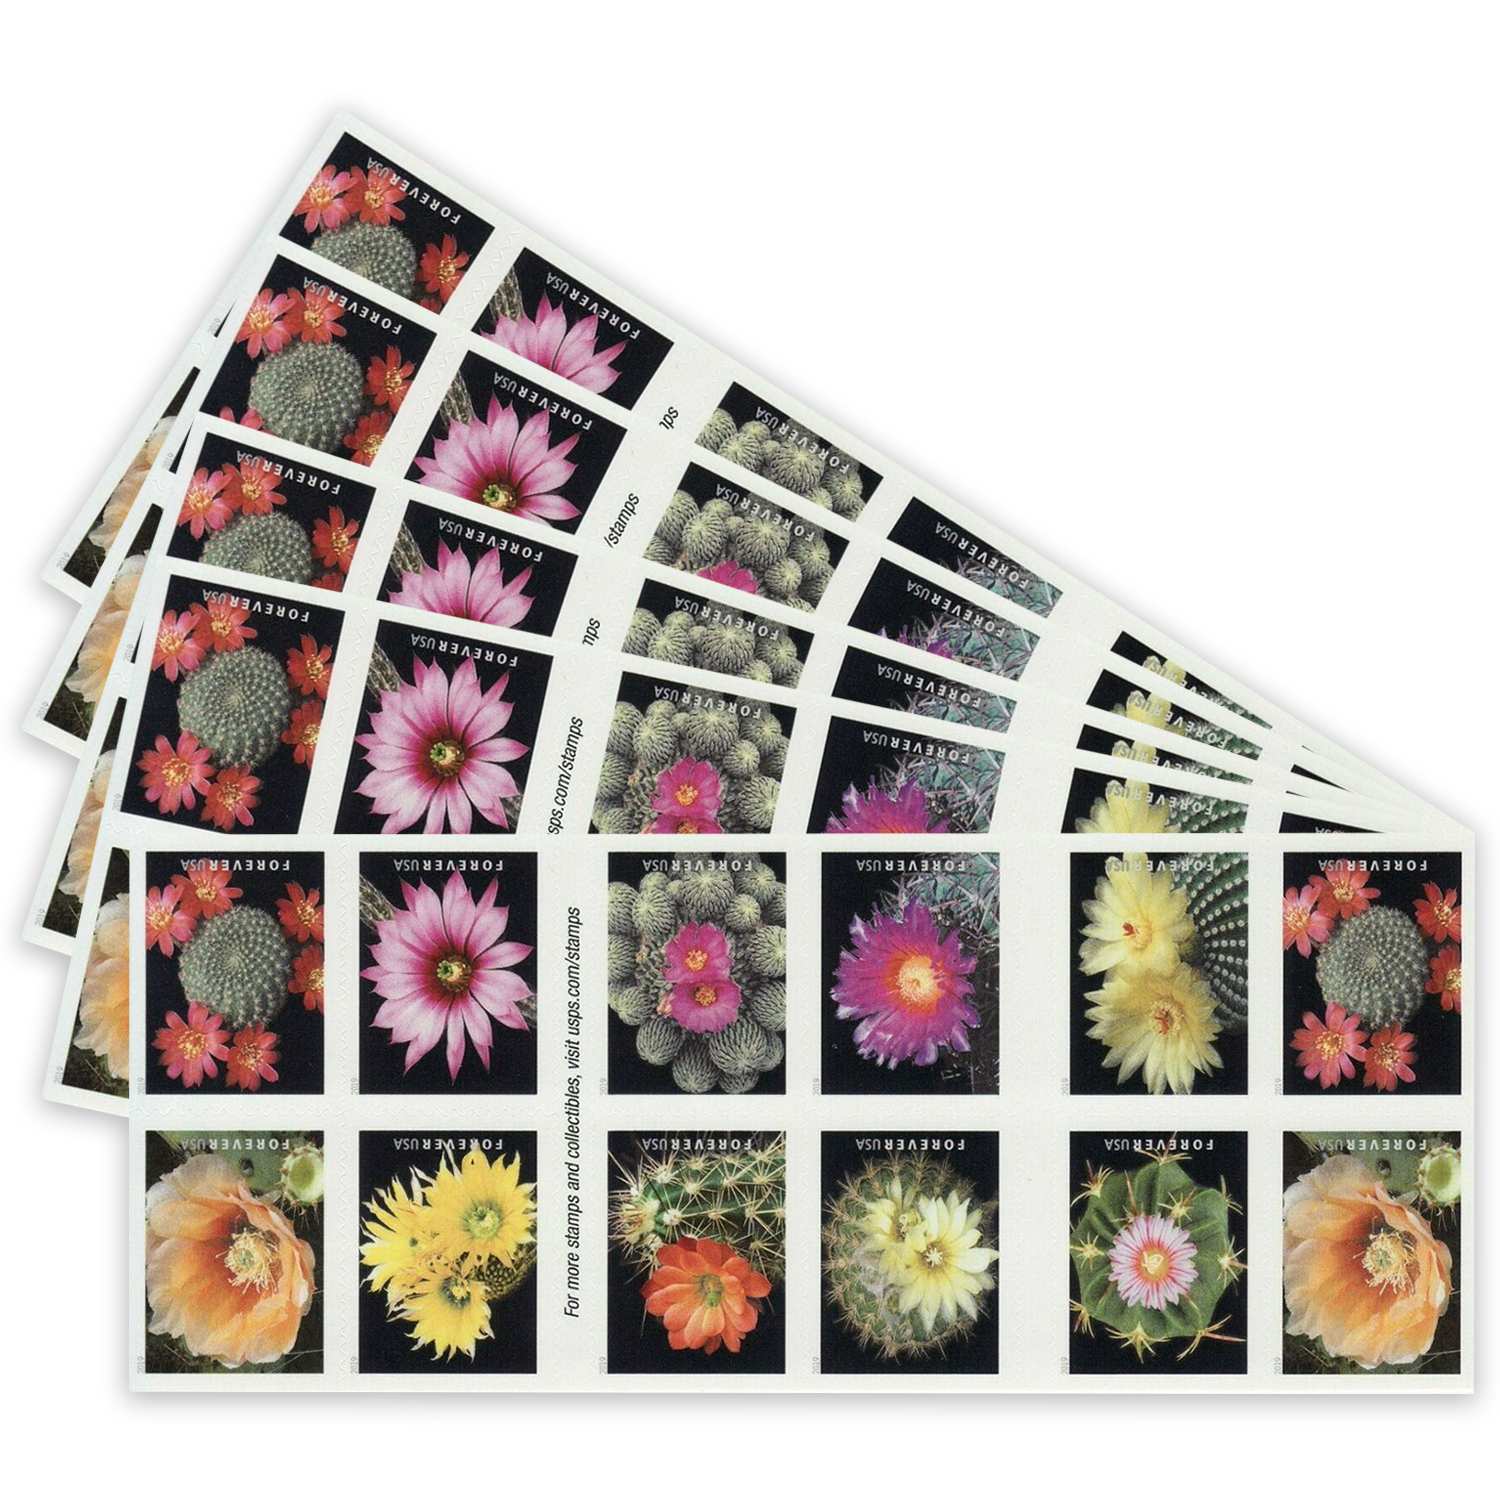 2019 USPS Flag Forever First-Class Postage Stamps Roll – DP FLOWERS CORP